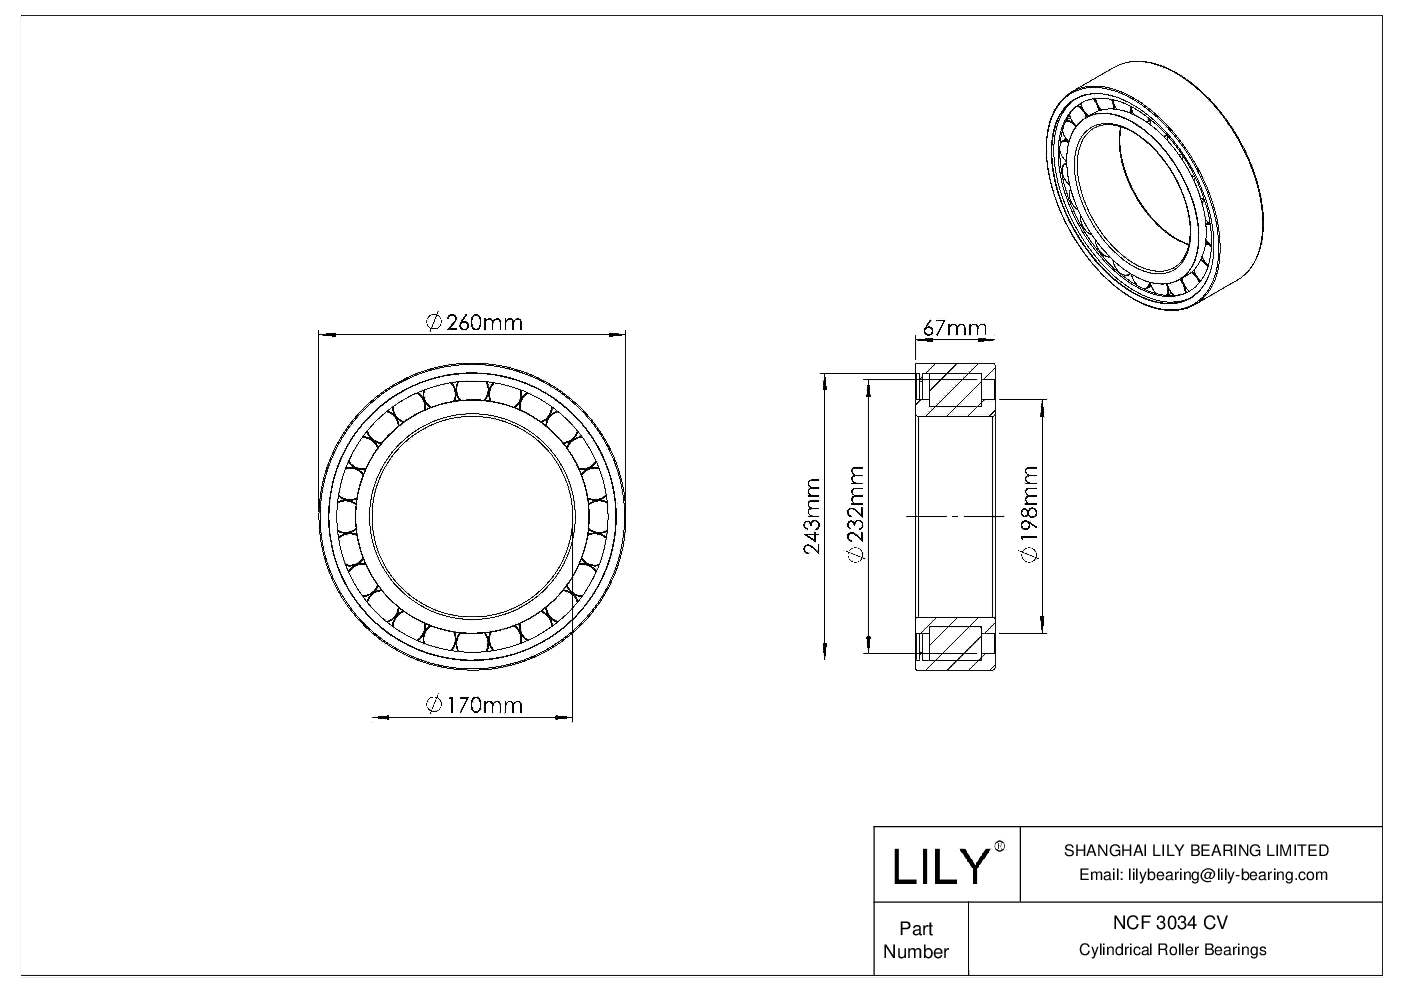 NCF 3034 CV Single Row Full Complement Cylindrical Roller Bearings cad drawing